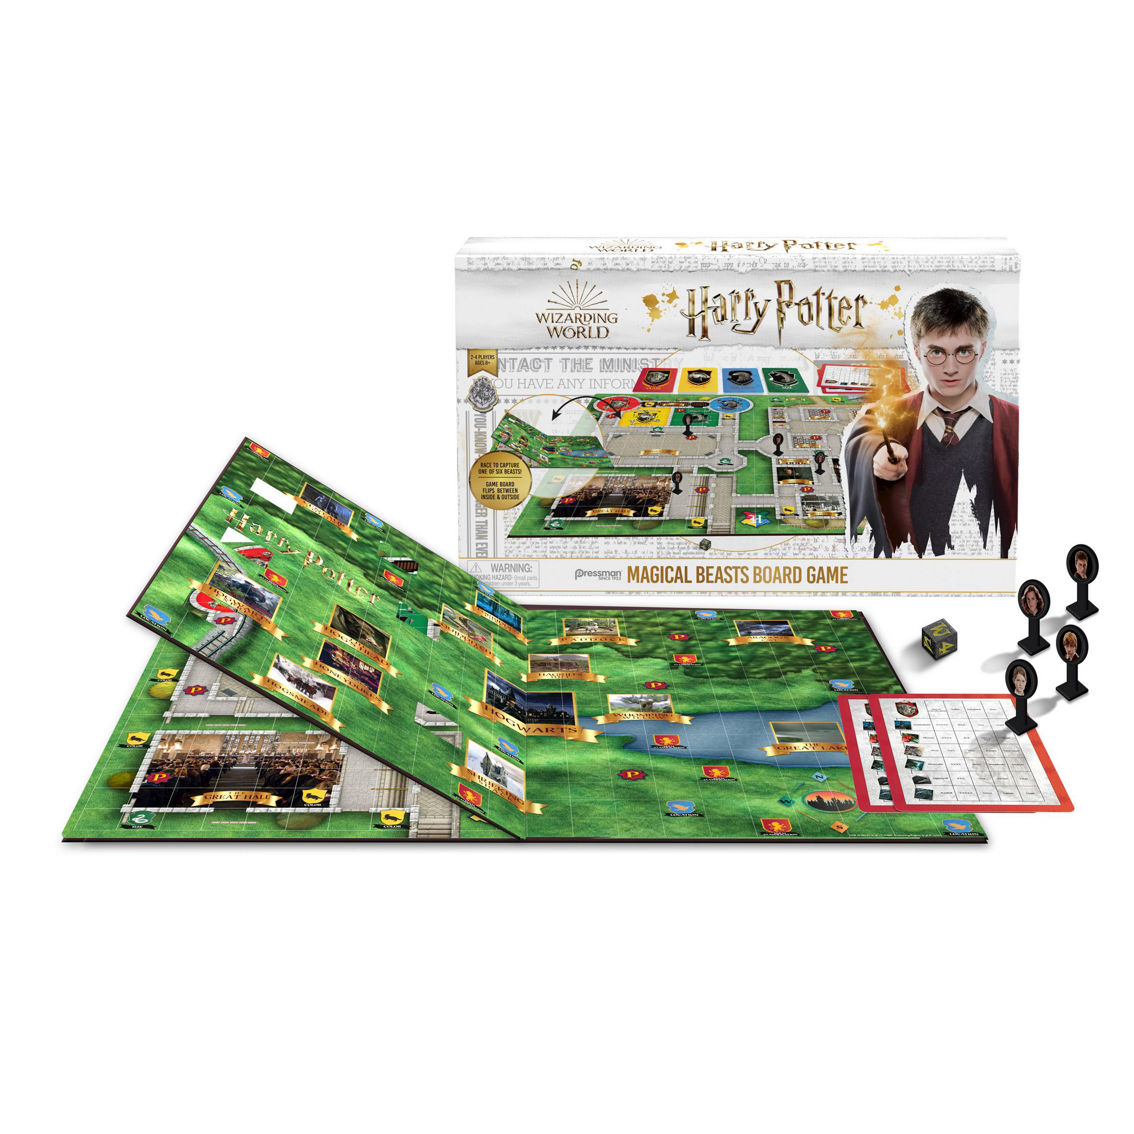 Pressman Toy Harry Potter Magical Beasts Board Game - Image 2 of 5